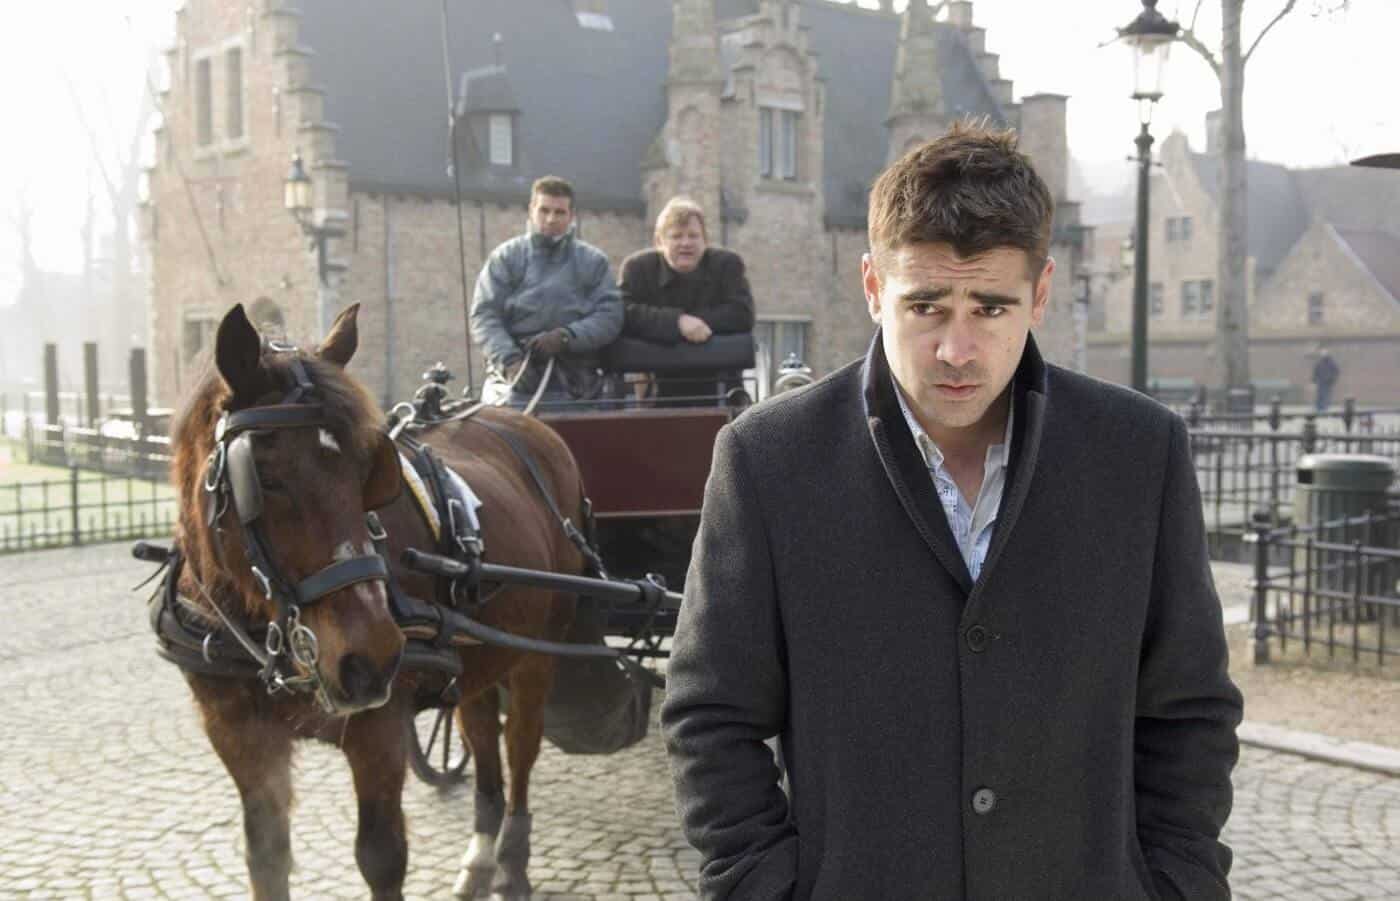 From the movie "In Bruges"